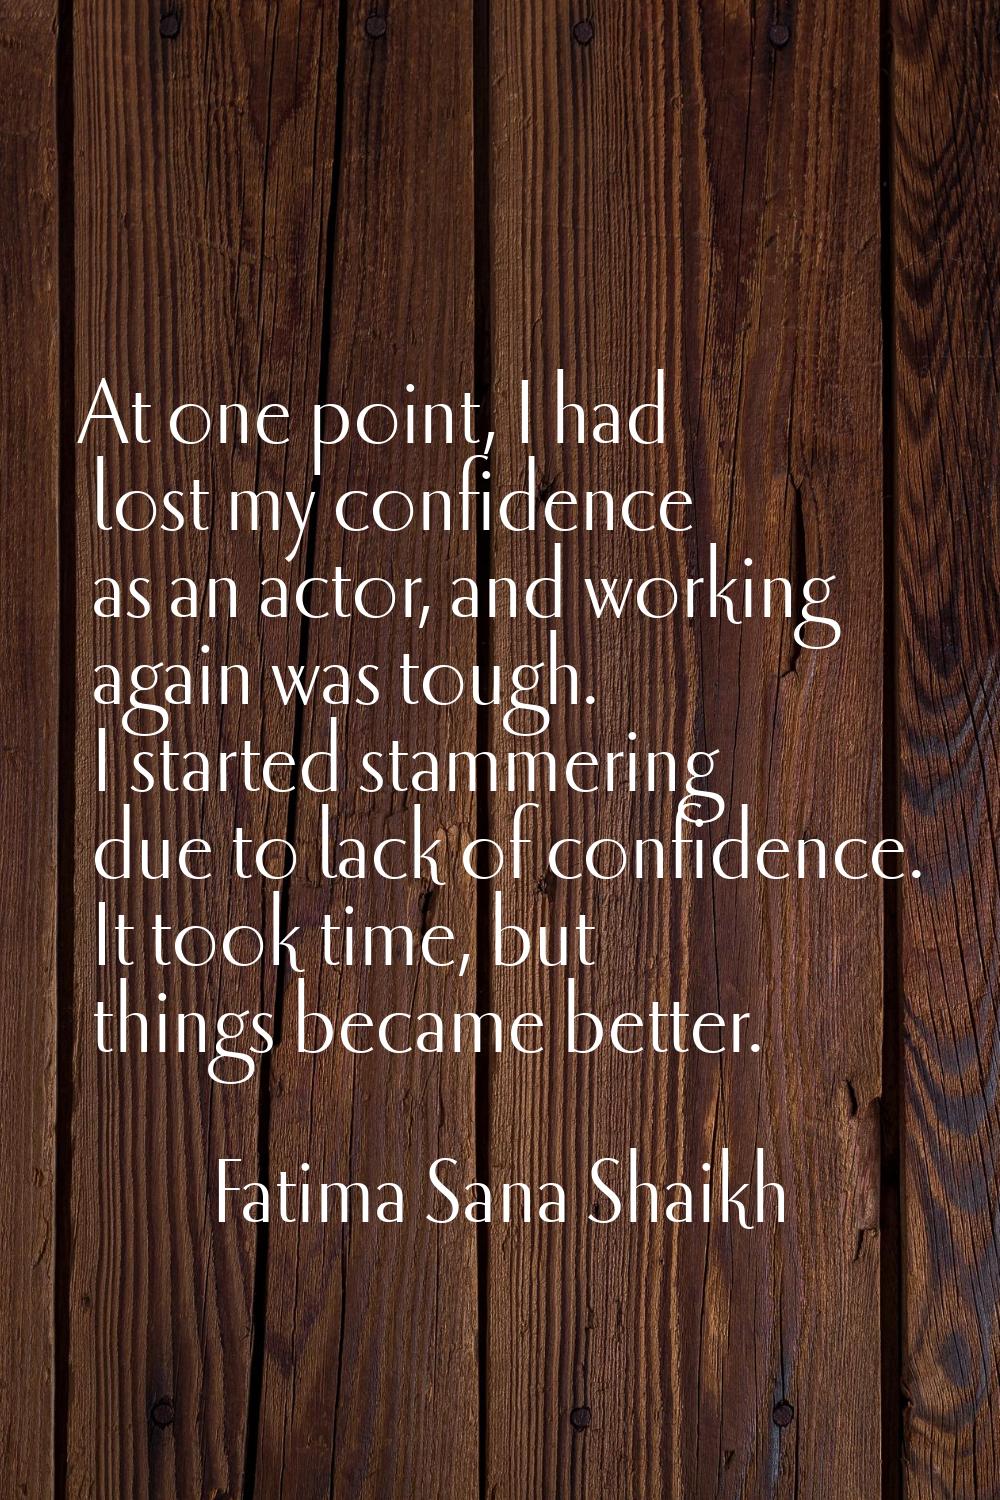 At one point, I had lost my confidence as an actor, and working again was tough. I started stammeri